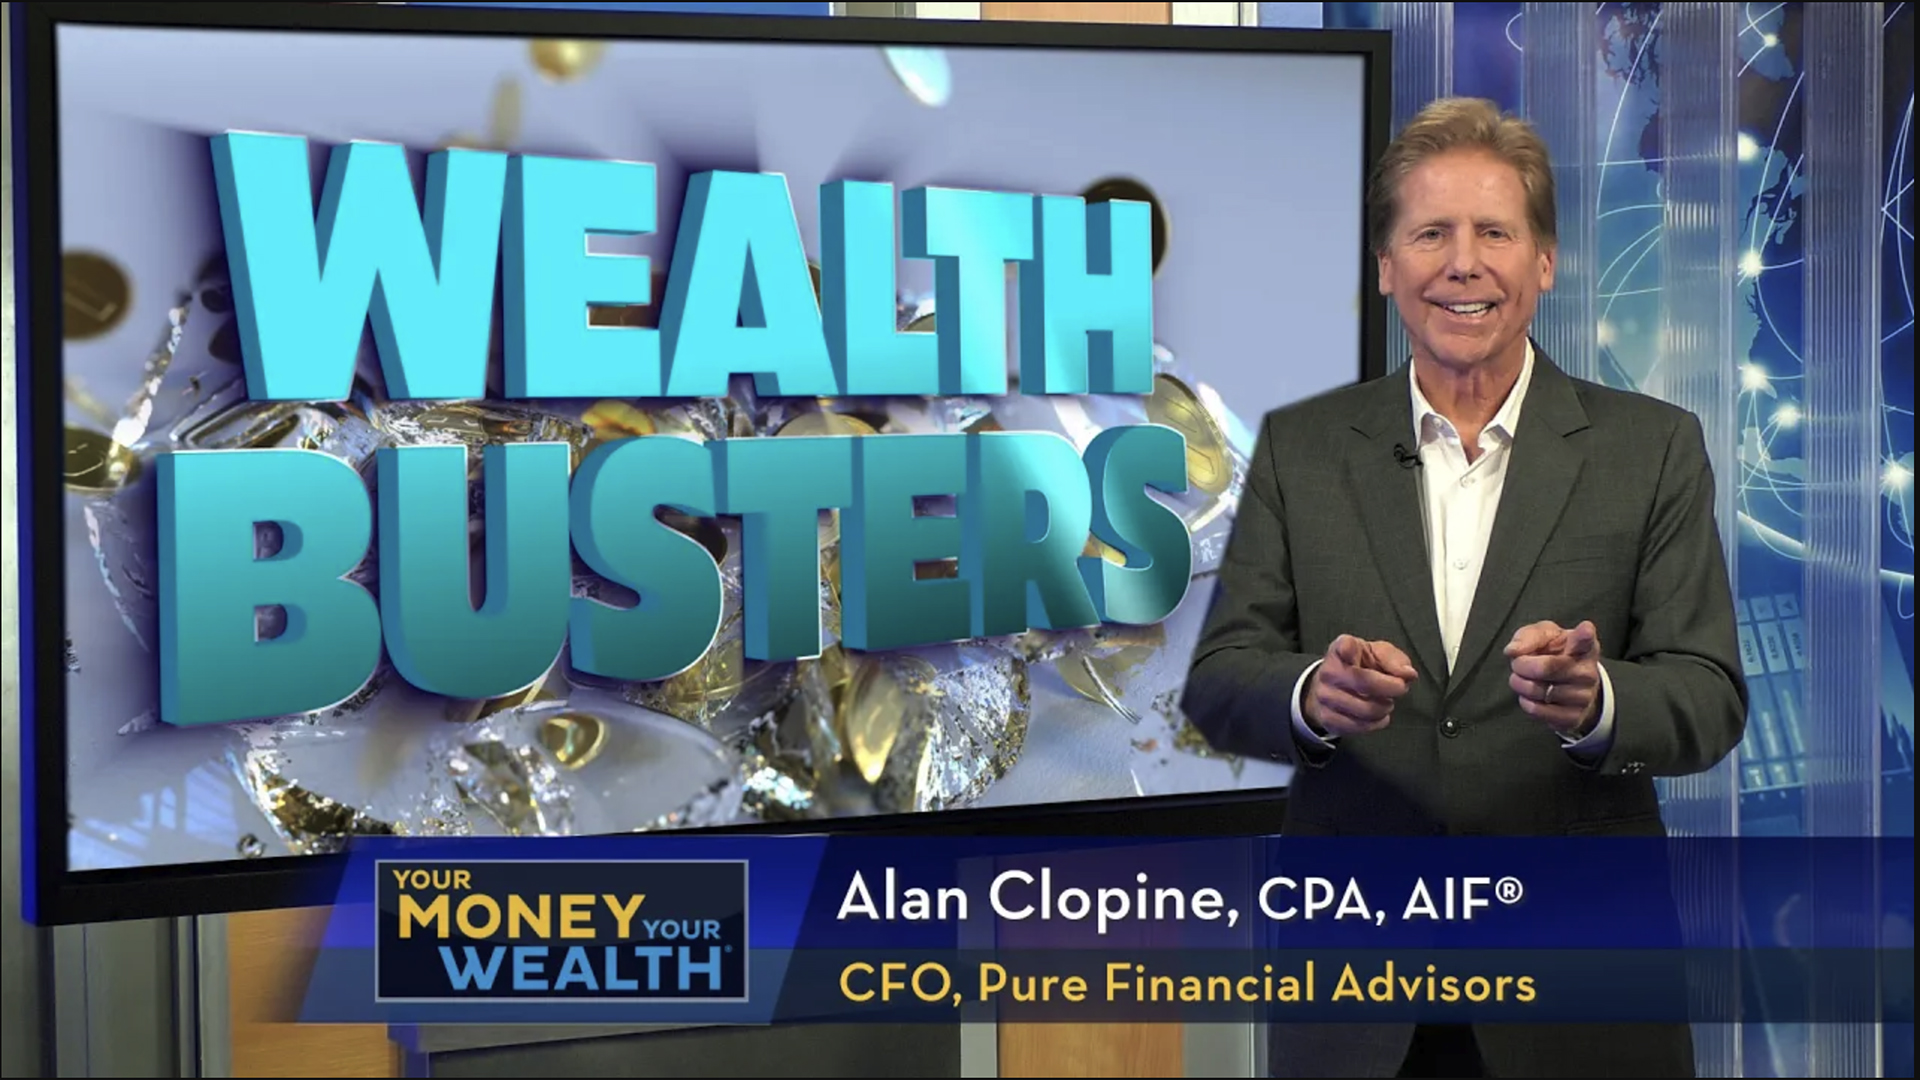 How to Avoid Wealth Busters! - Your Money, Your Wealth® TV S8 | E22